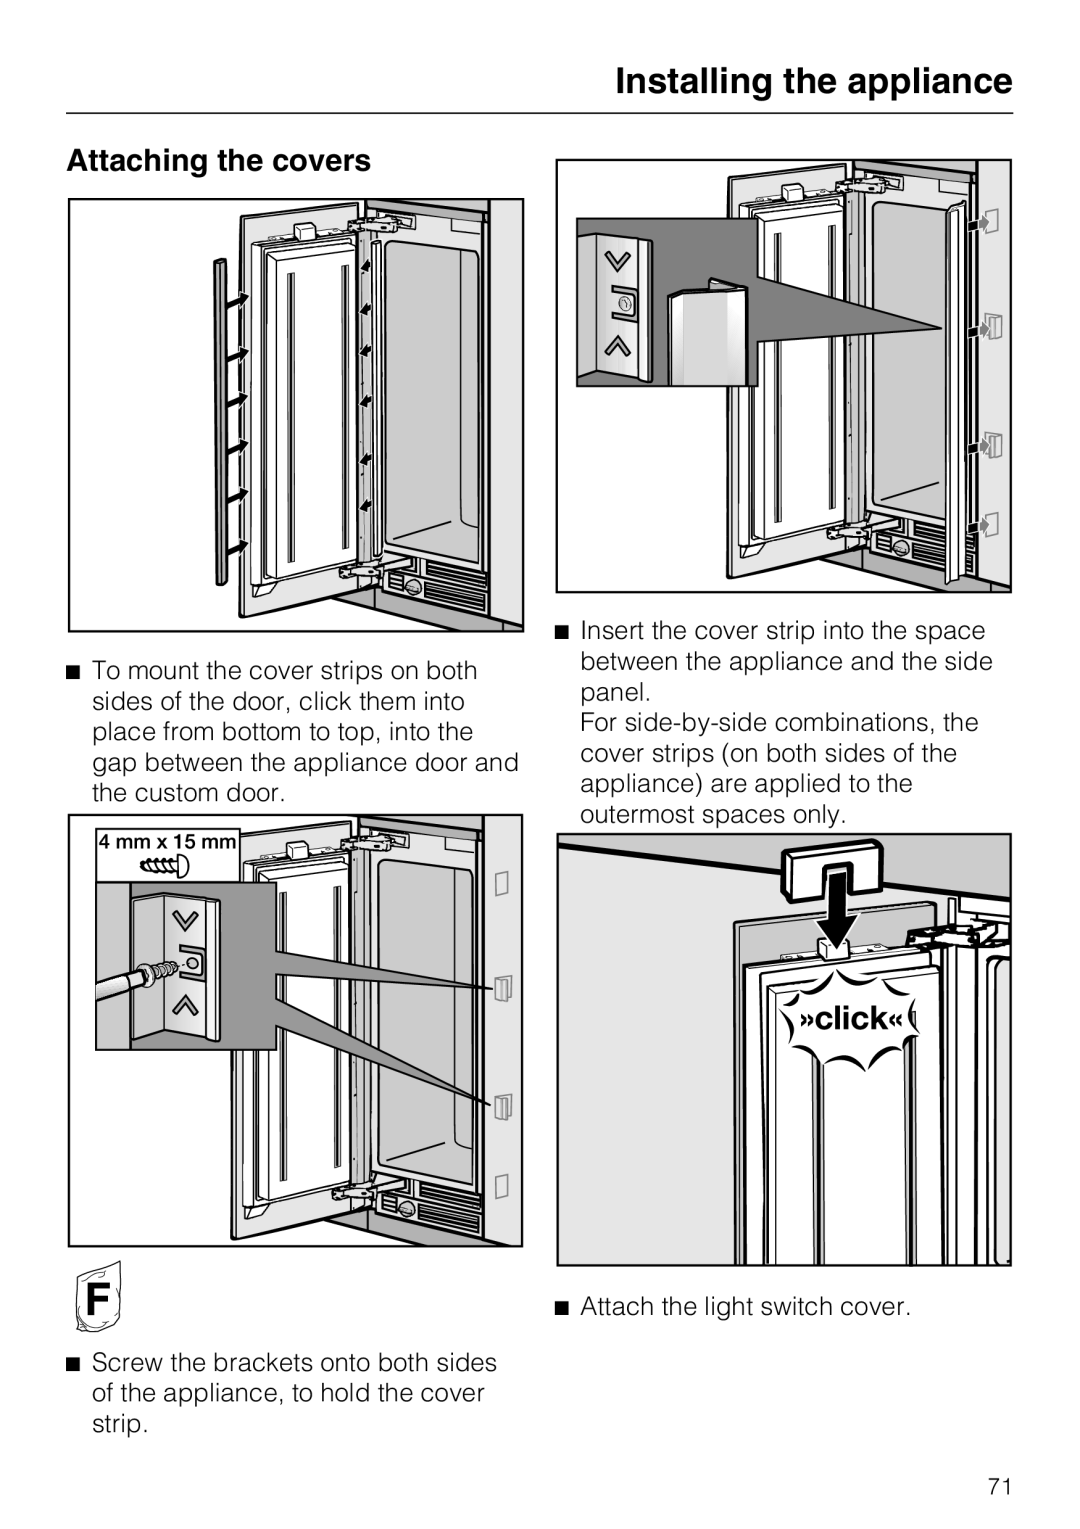 Miele F1471VI installation instructions Attaching the covers, Installing the appliance 